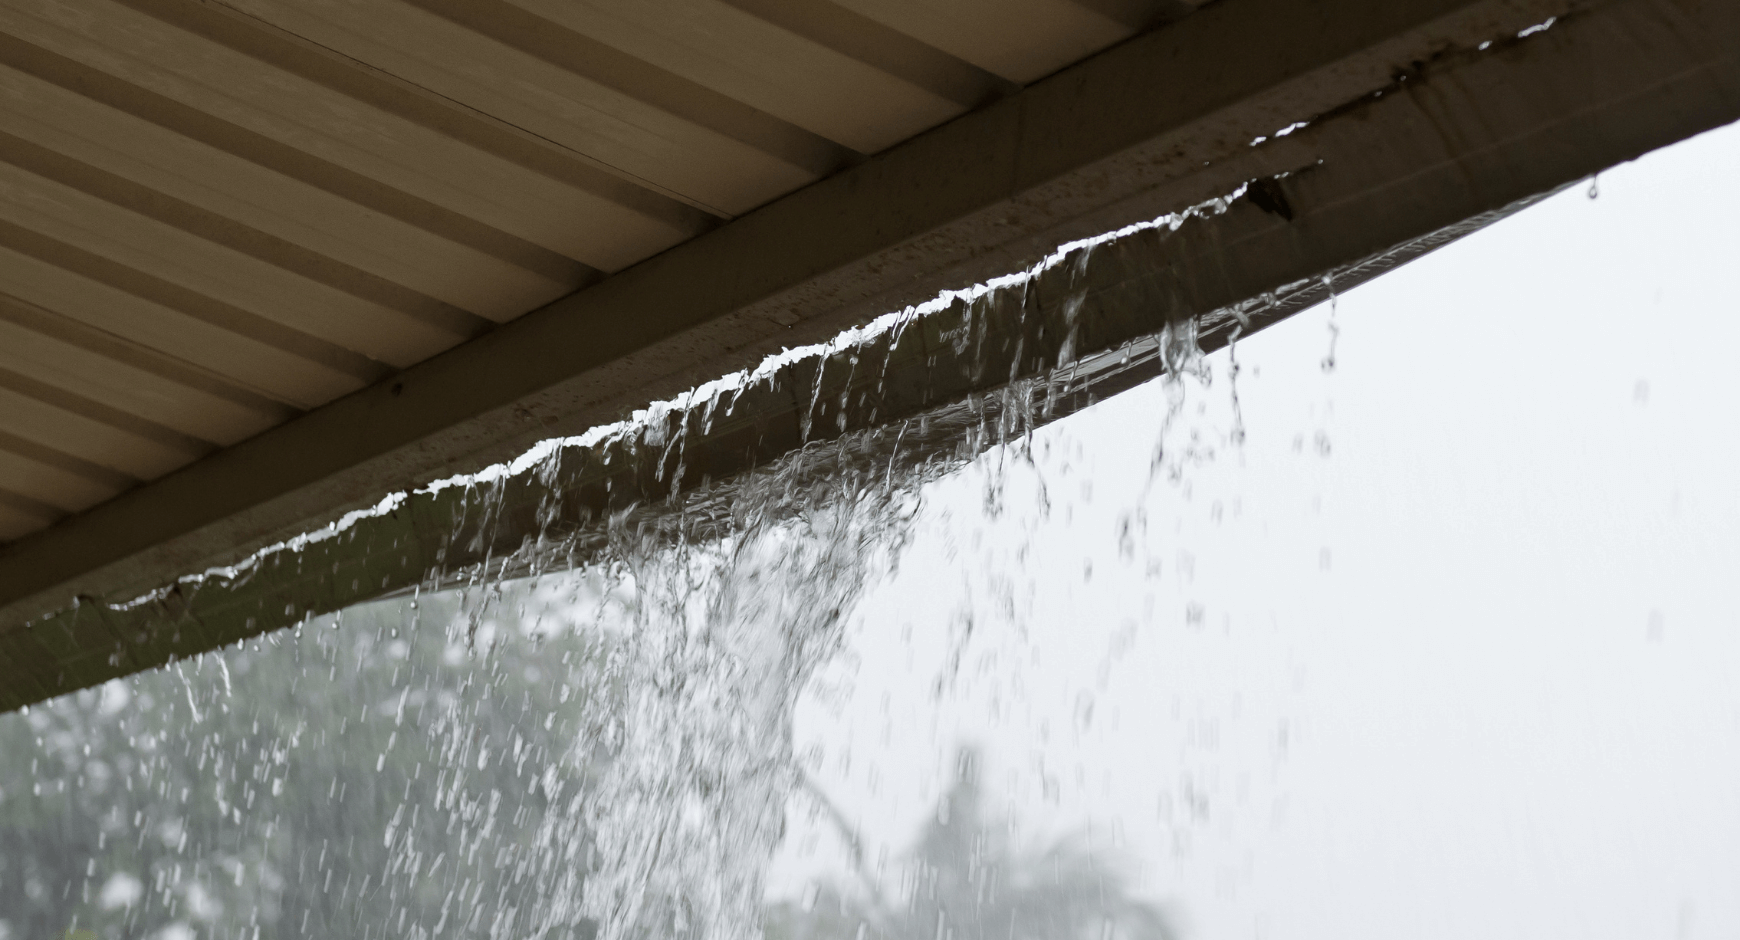 Image of a leaking gutter